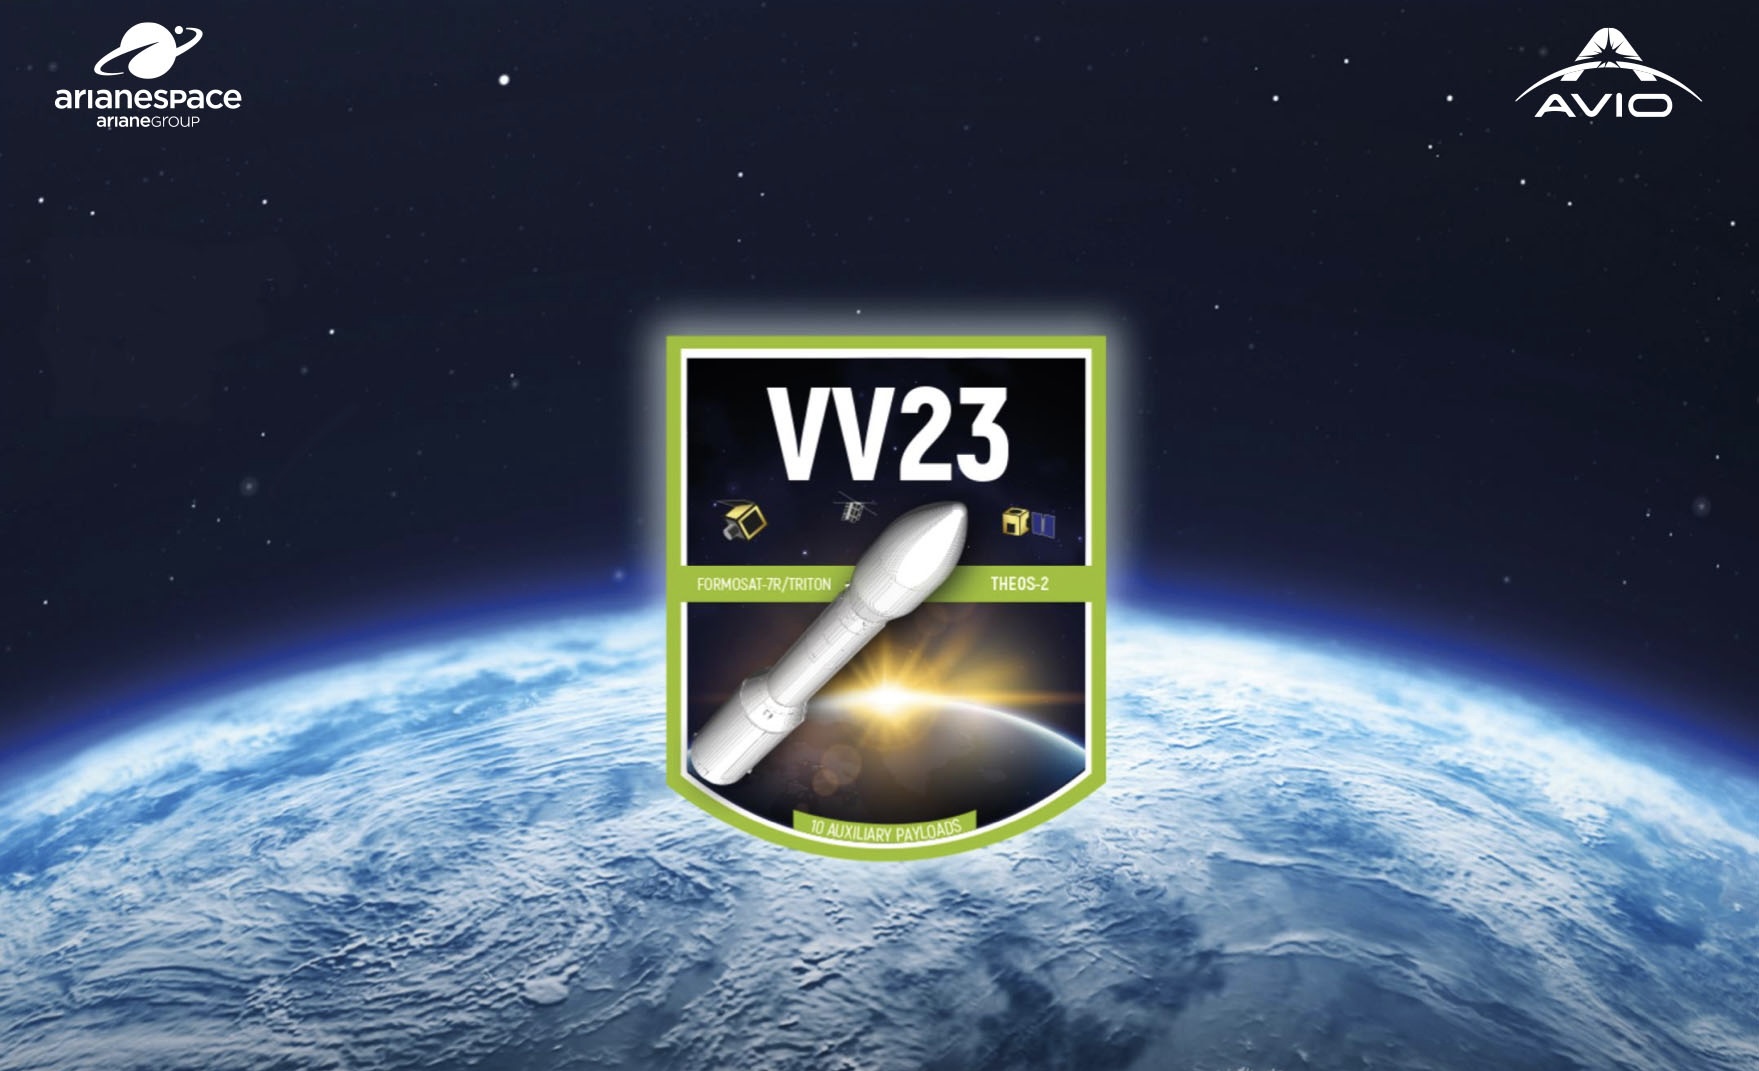 VV23 graphics from Arianespace